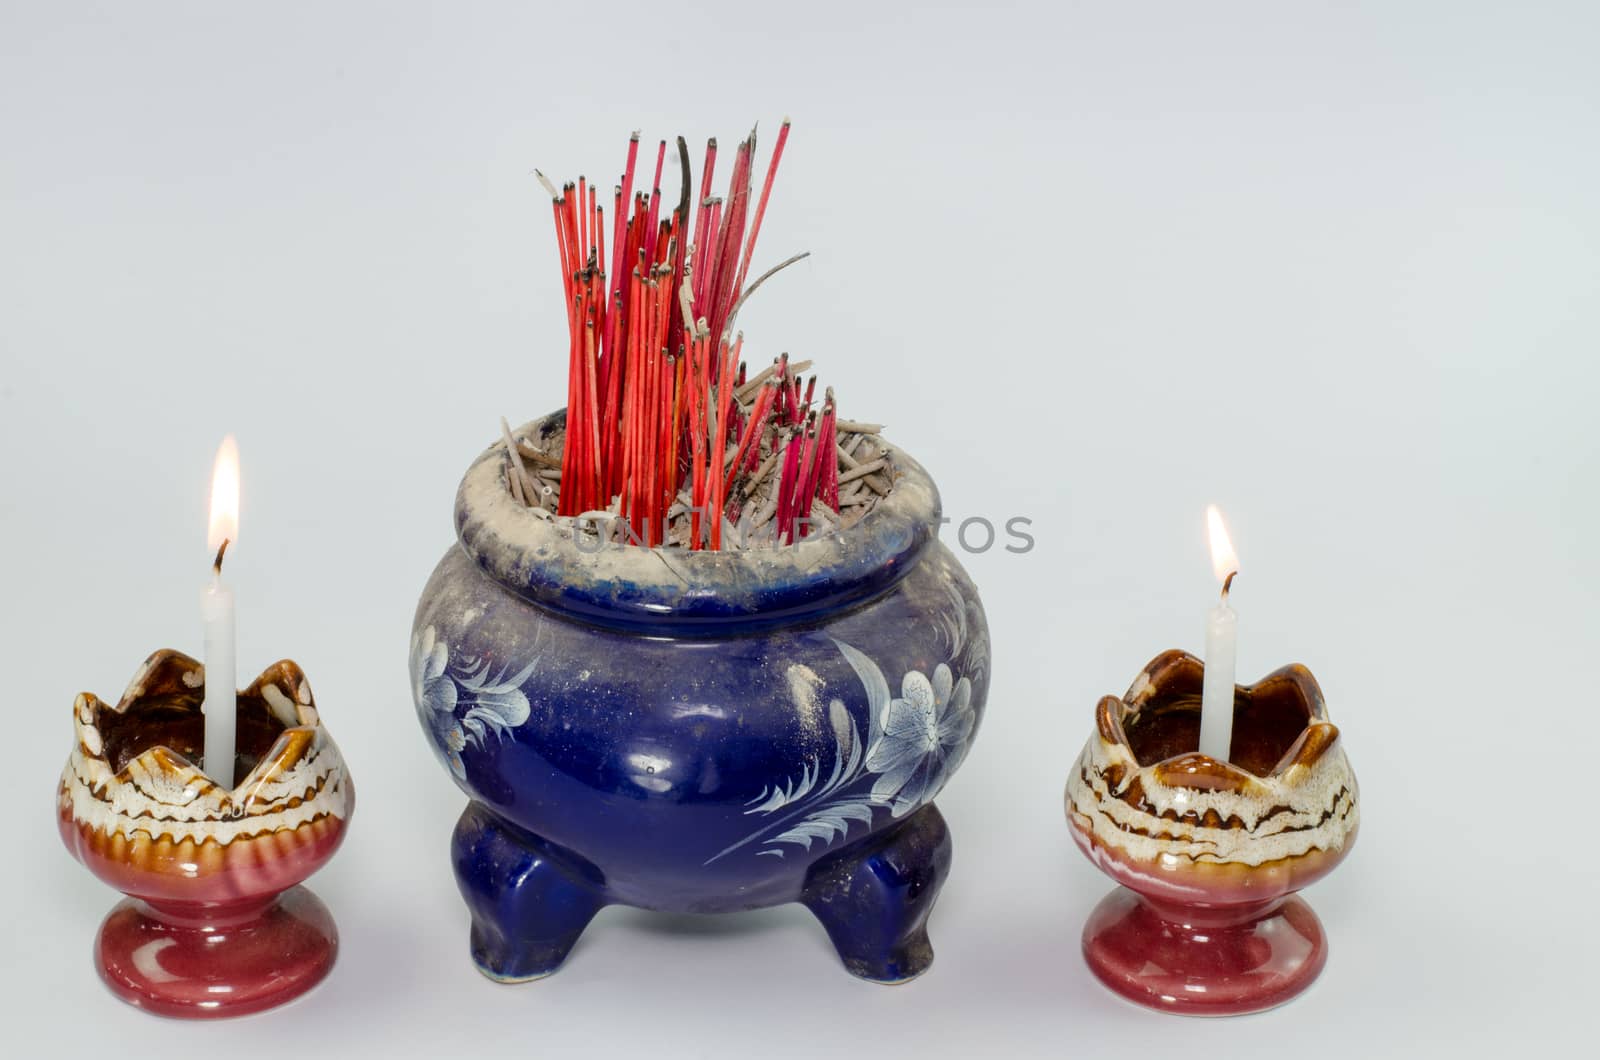 Incense burner and fire  on white background